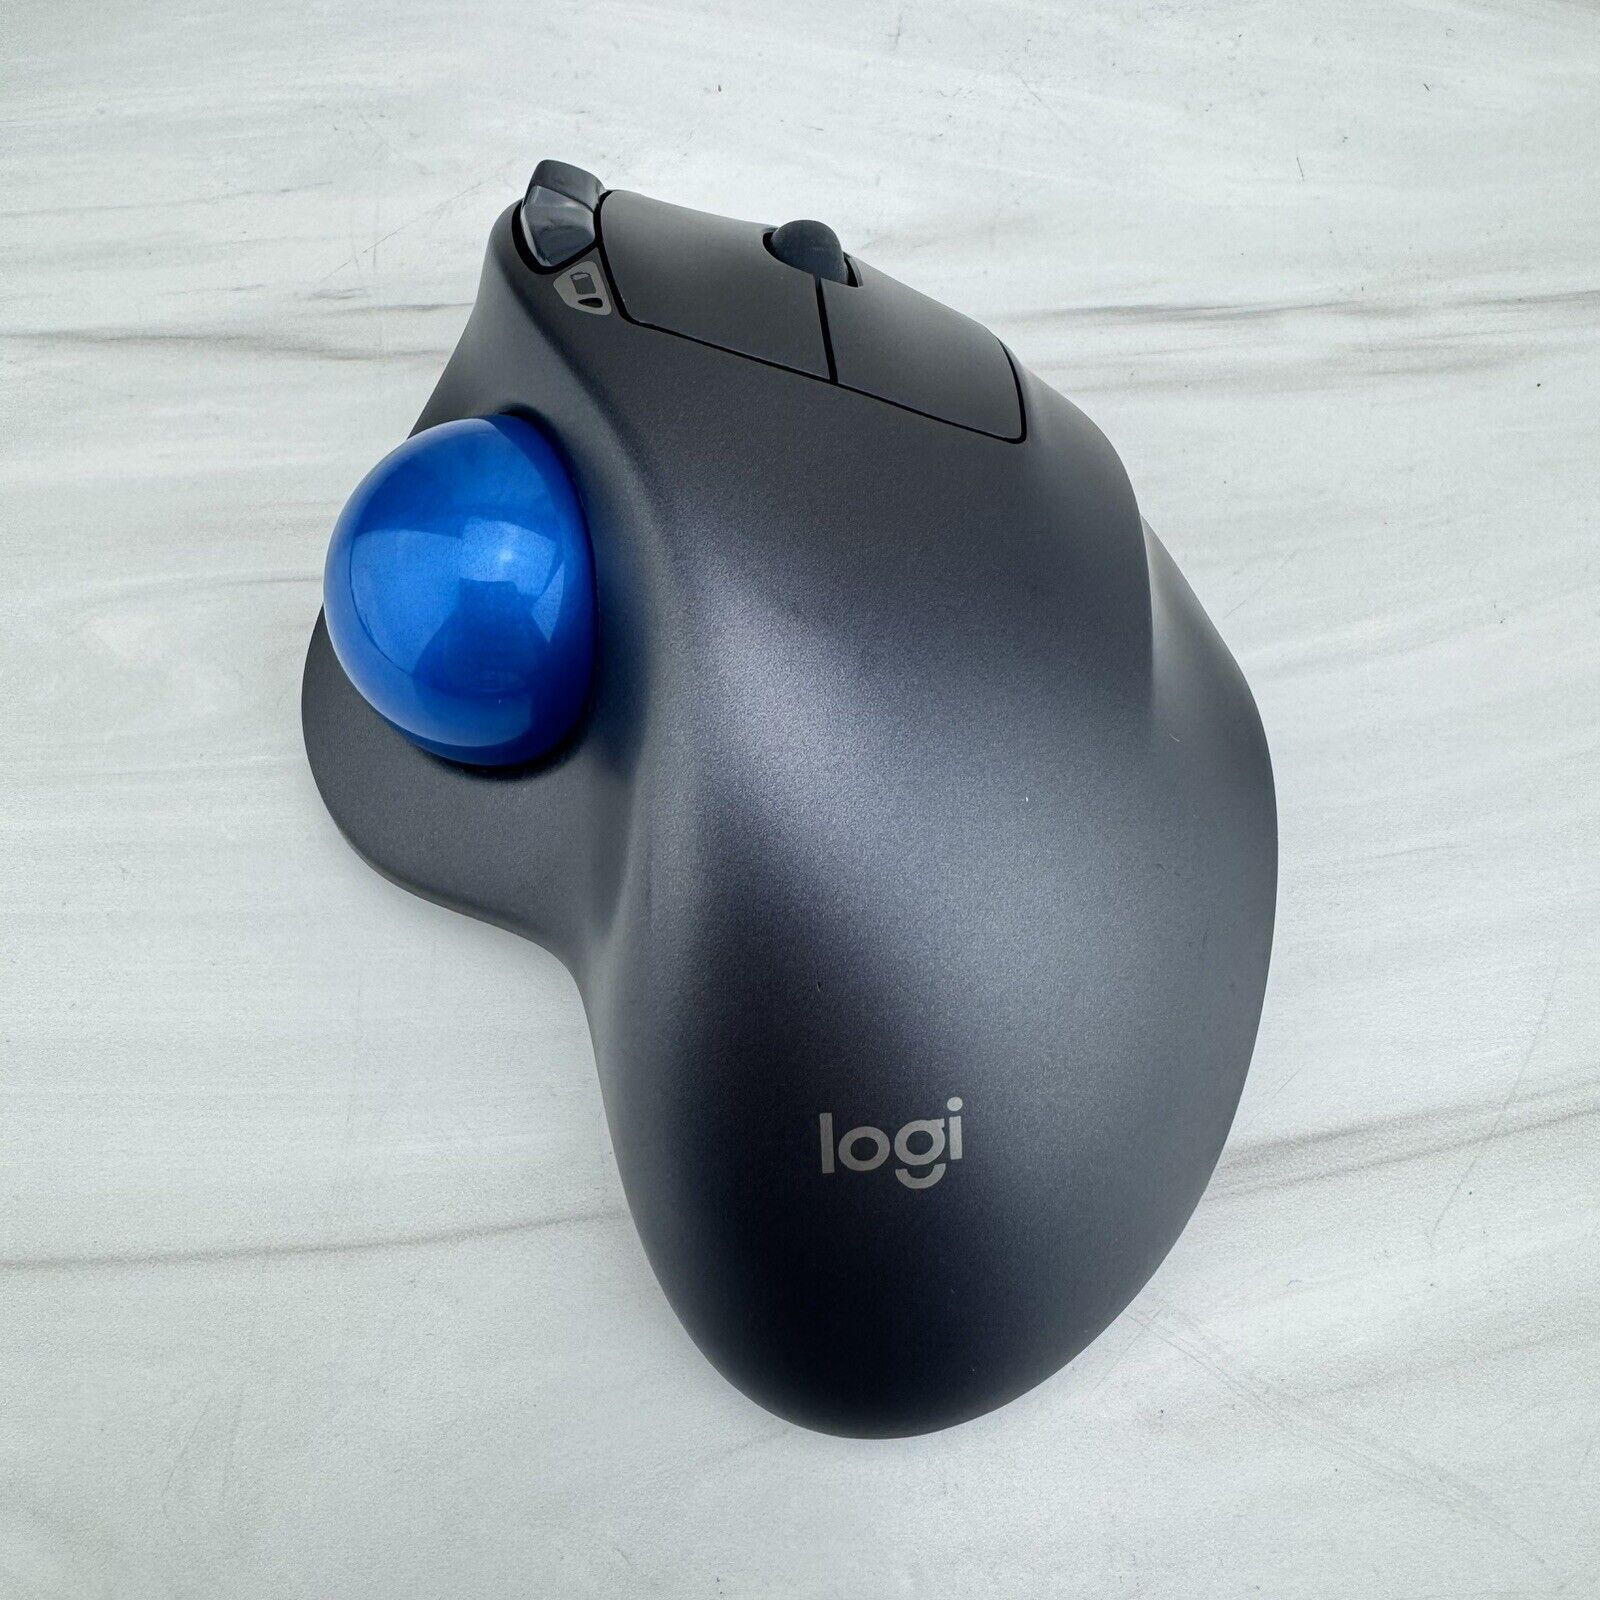 Logitech M570 Dark Gray w Blue Trackball Mouse Wireless With USB Receiver Dongle